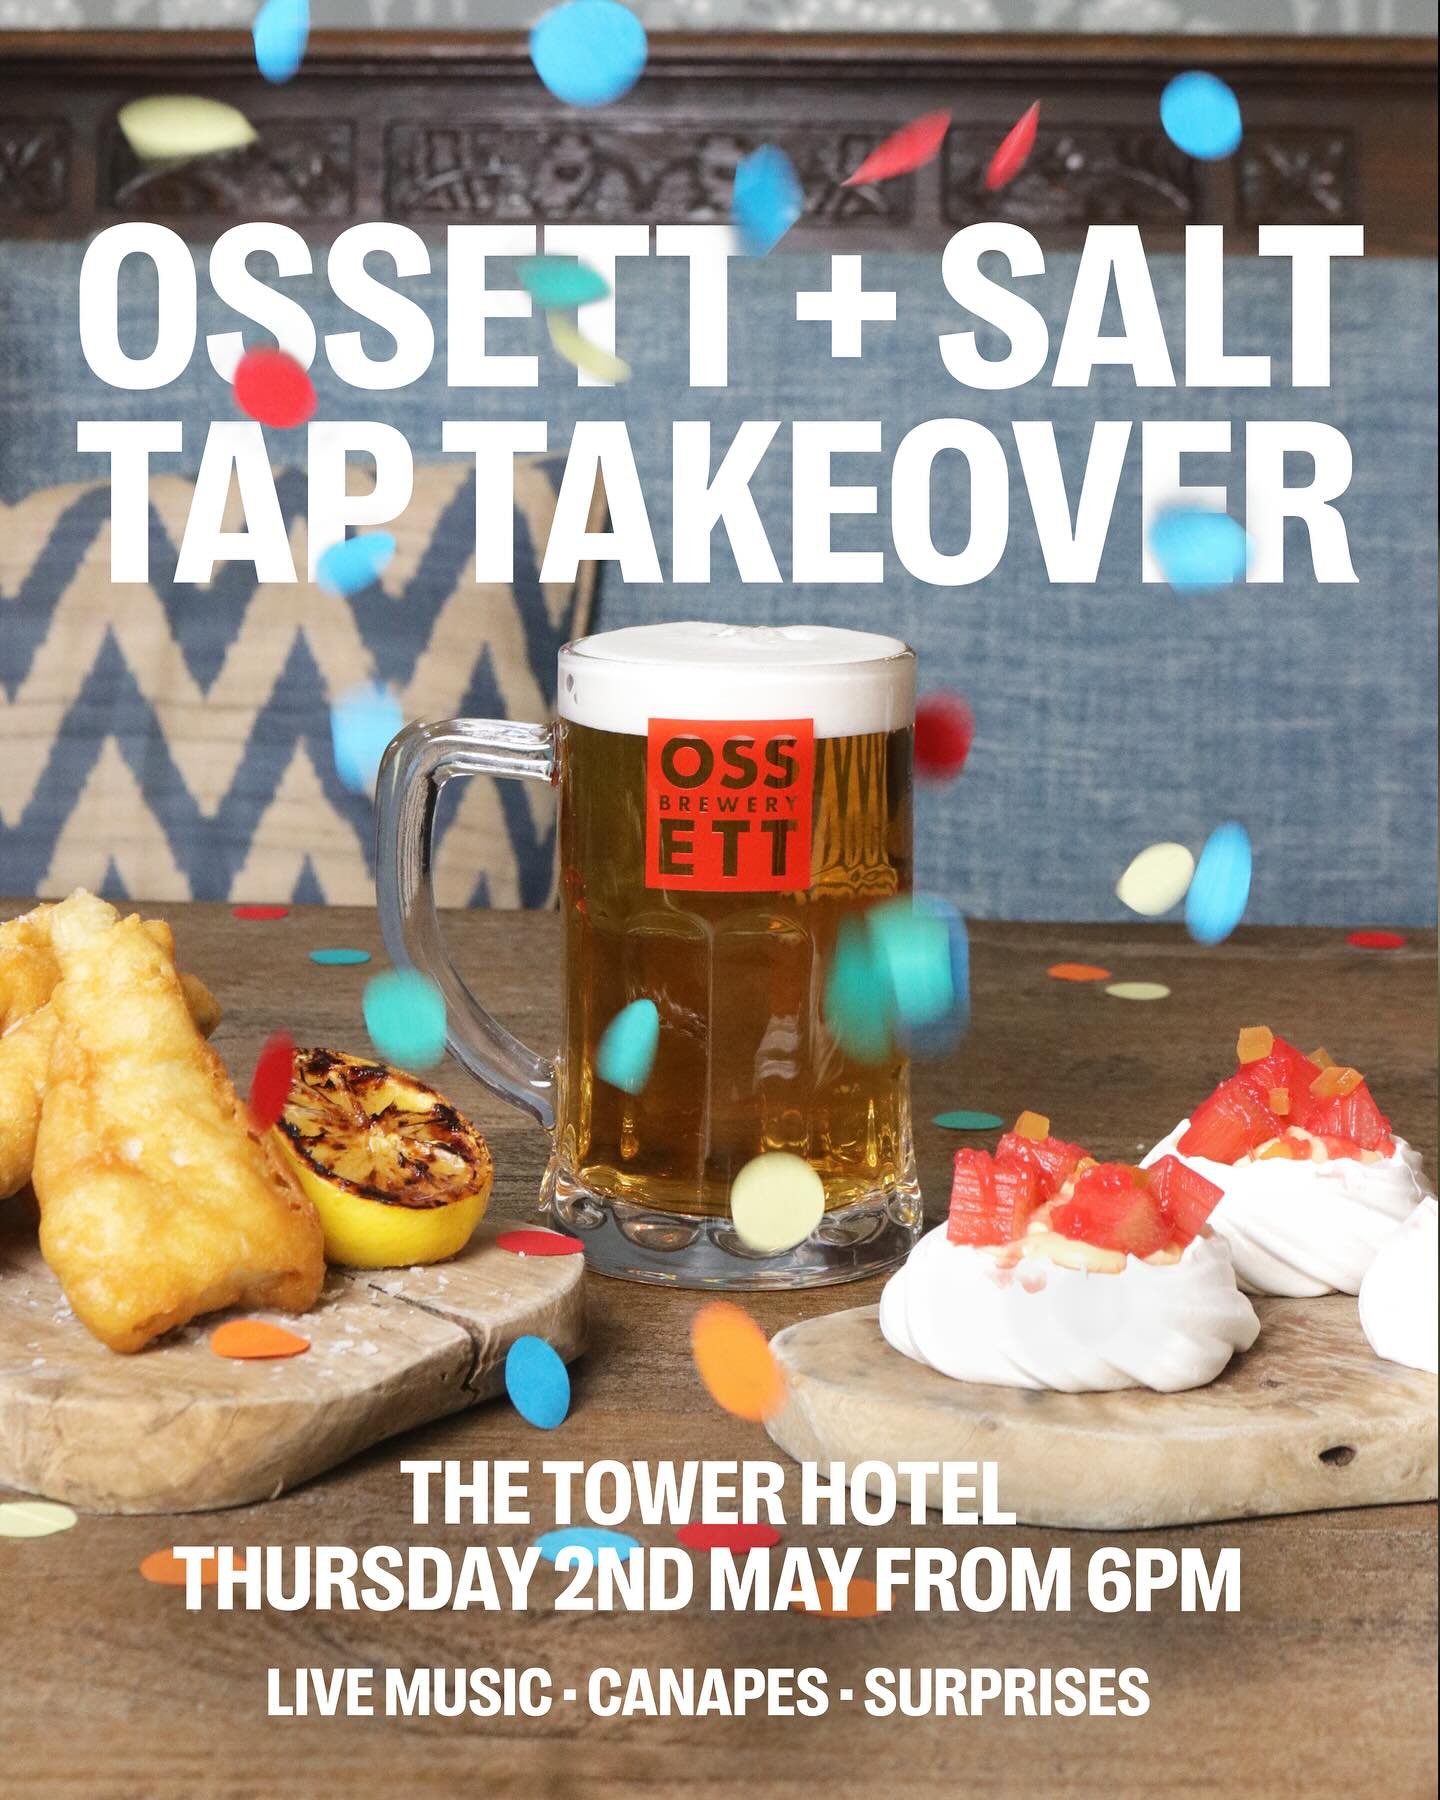 Yorkshire themed Canap&eacute; testing for tomorrow night&hellip;✨🍺

Join us tomorrow as we team up with Ossett and Salt Brewery to bring 8 great beers to our bar for a very special night with live music from Hey Dude 🍻🎸✨

We&rsquo;ll also be serv